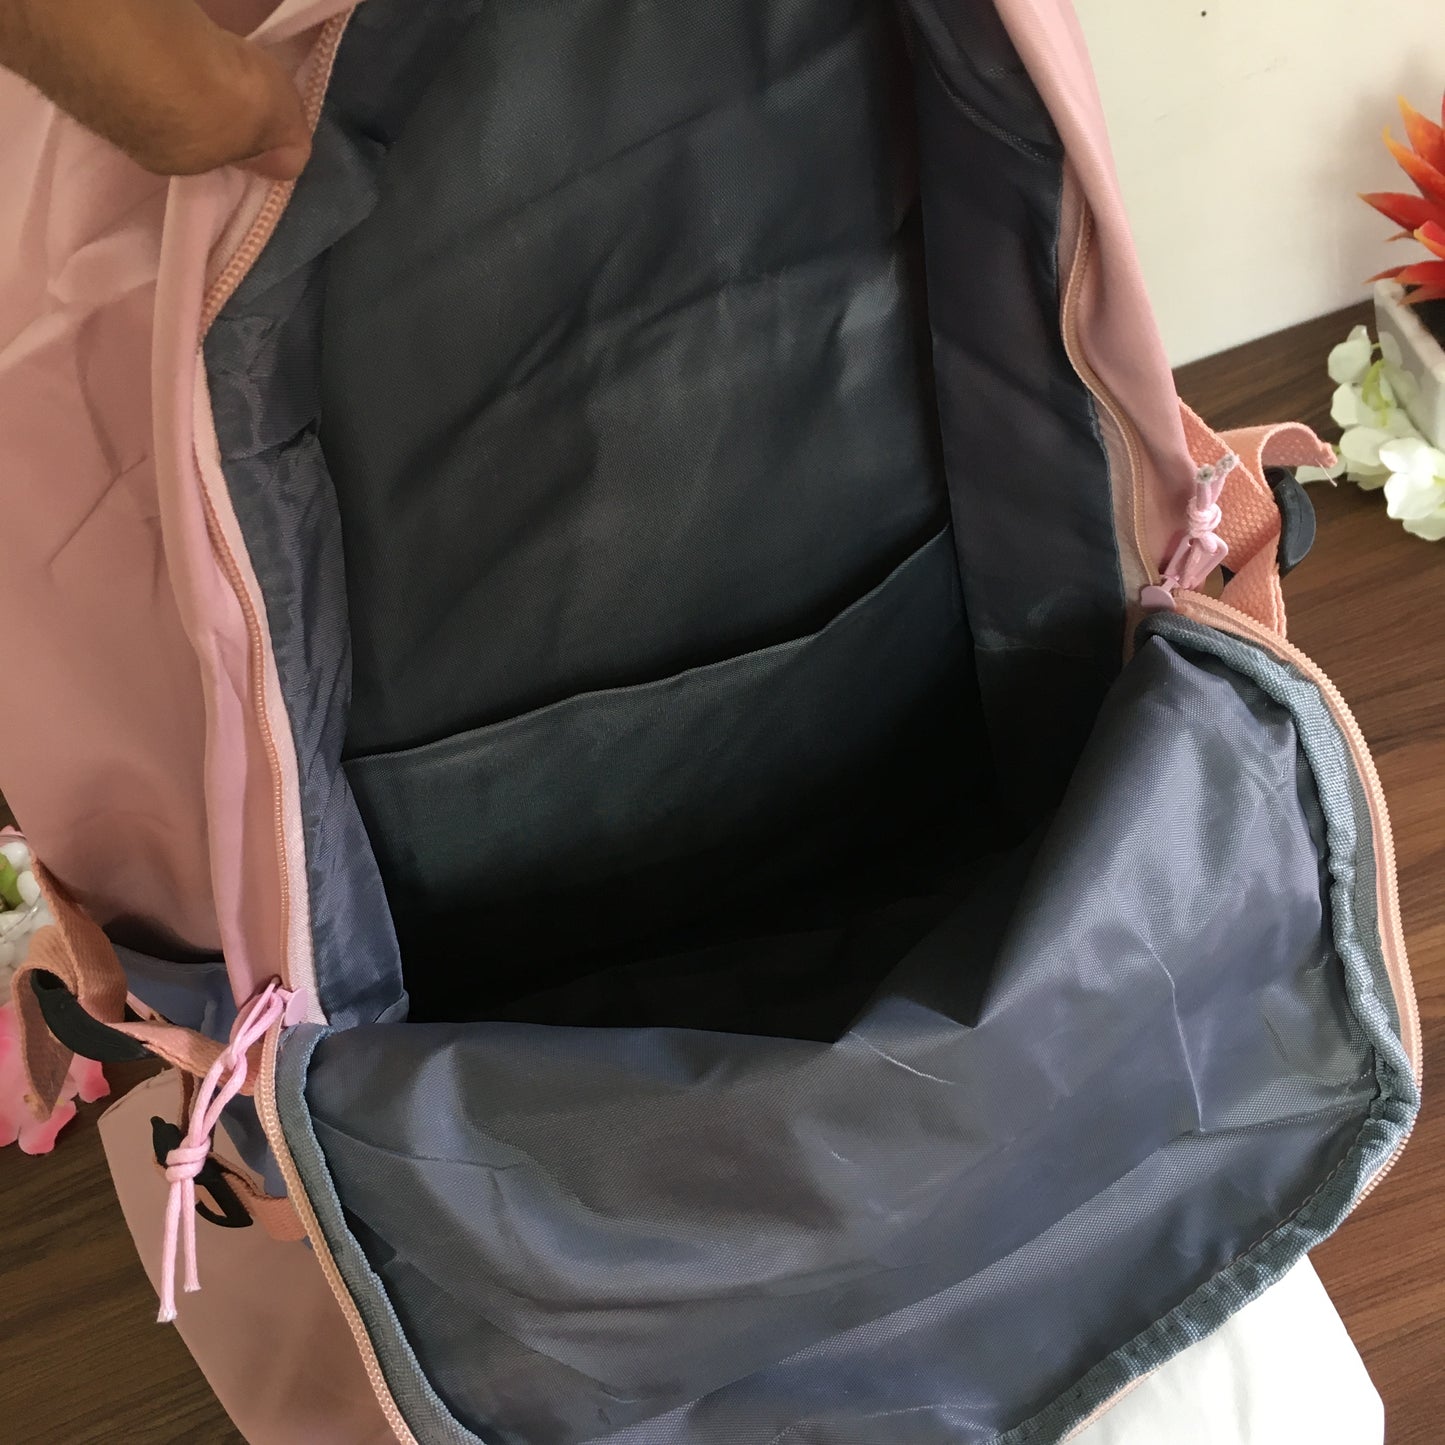 High Quality Korean Style Backpacks D no - 115